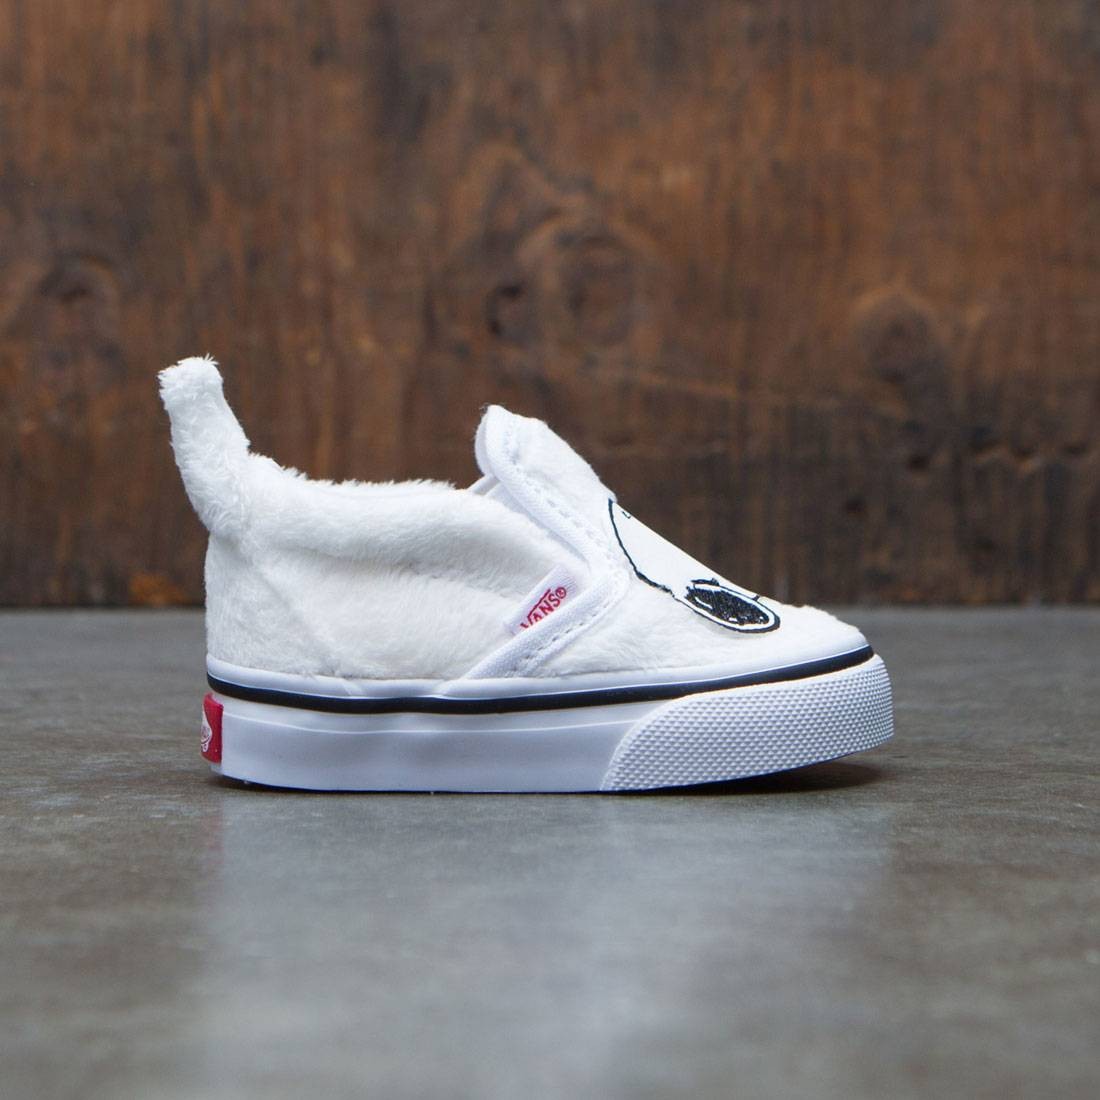 Vans x Peanuts Toddlers Classic Slip-On - Snoopy (white / true white)